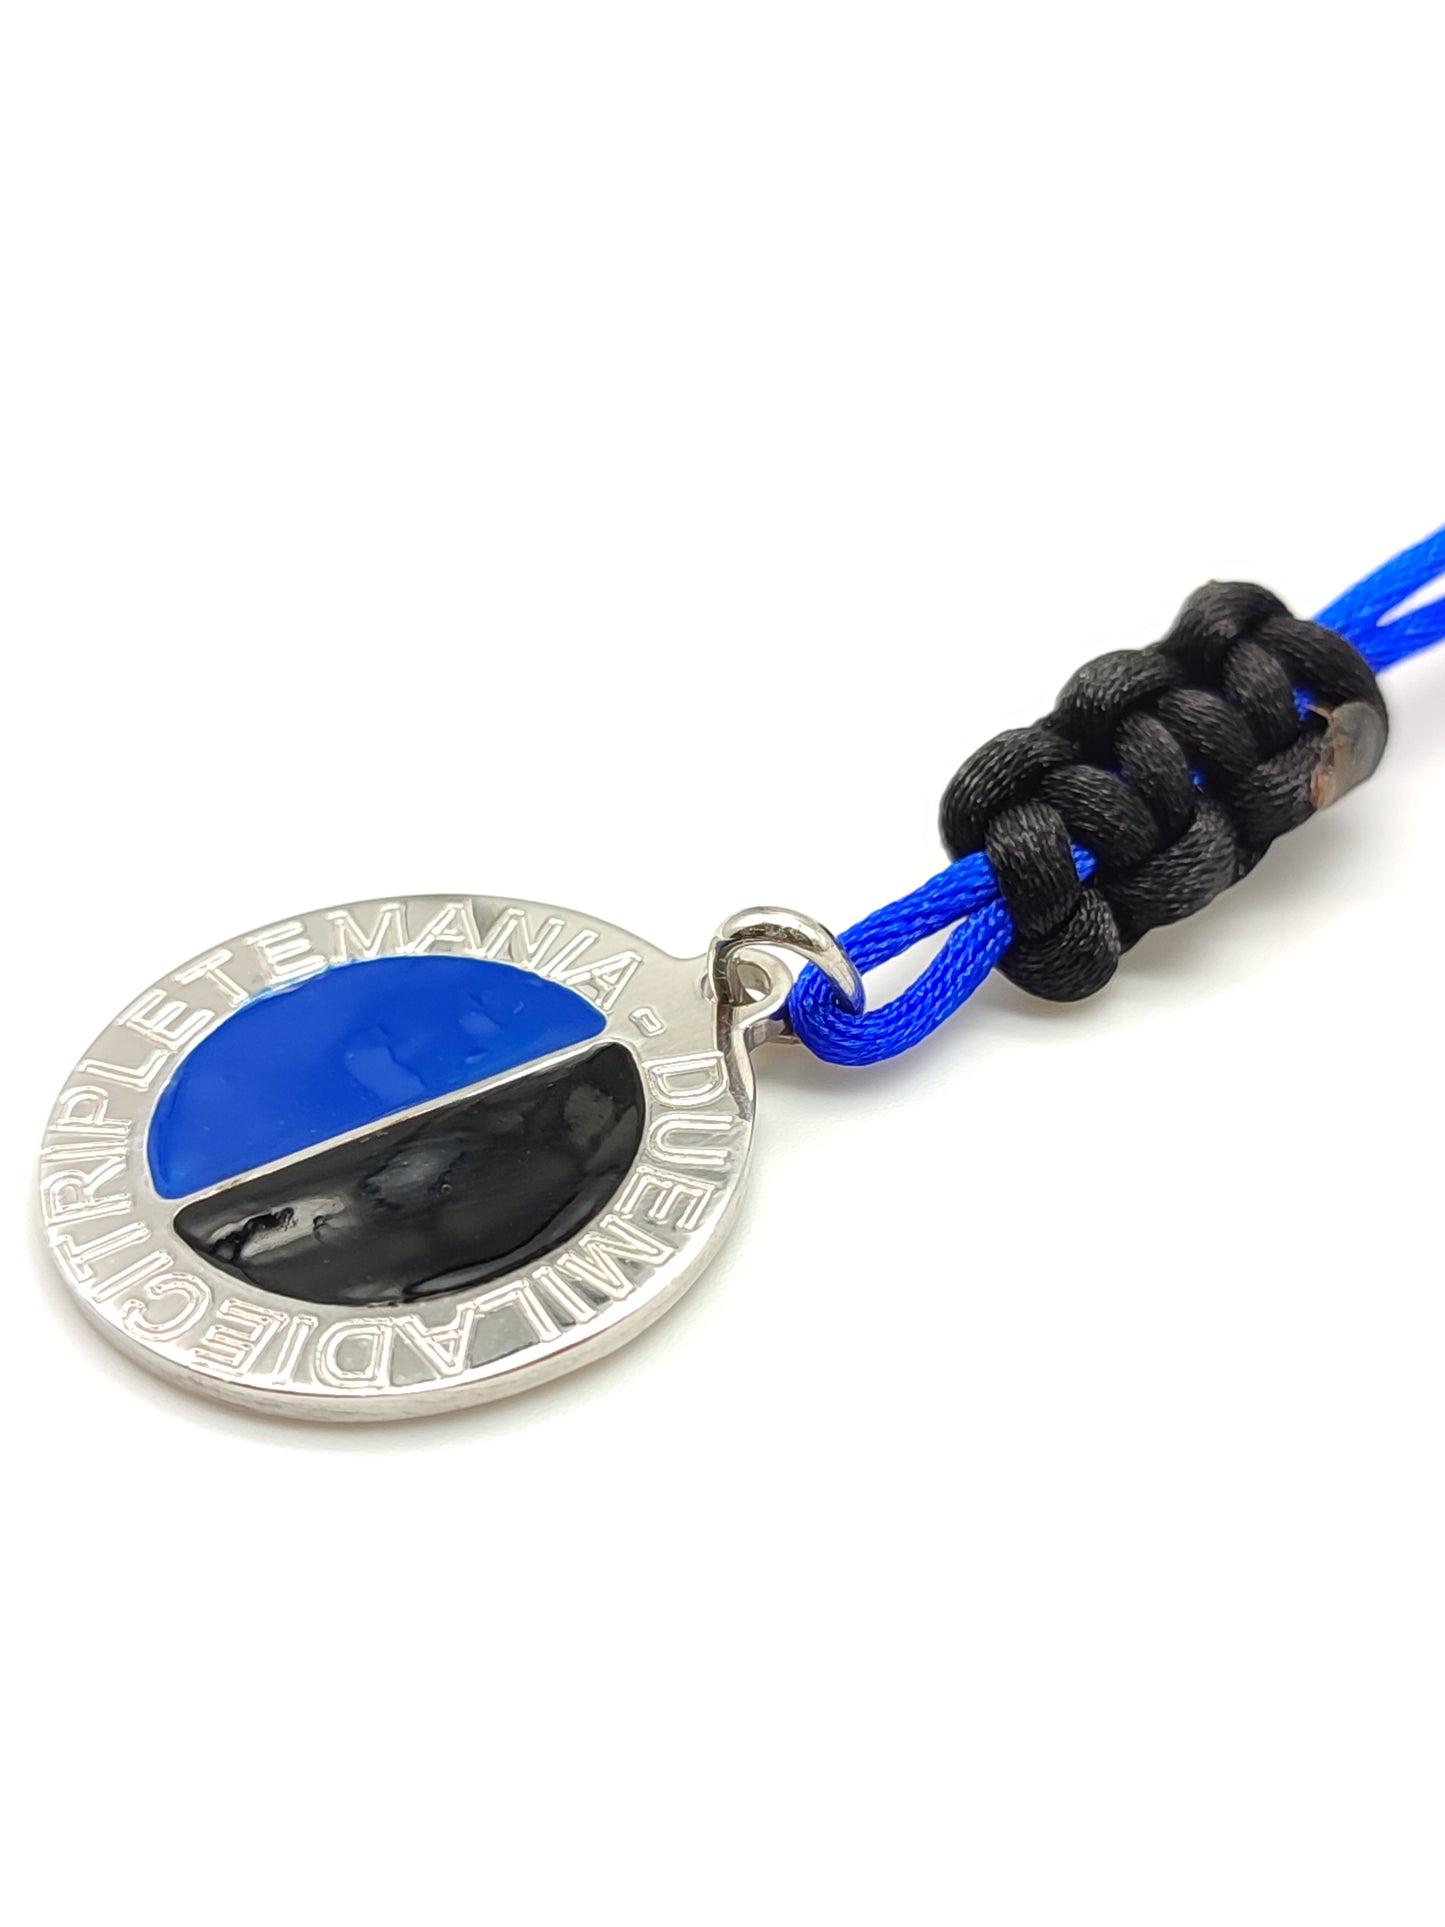 Inter treble silver keyring with satin cord